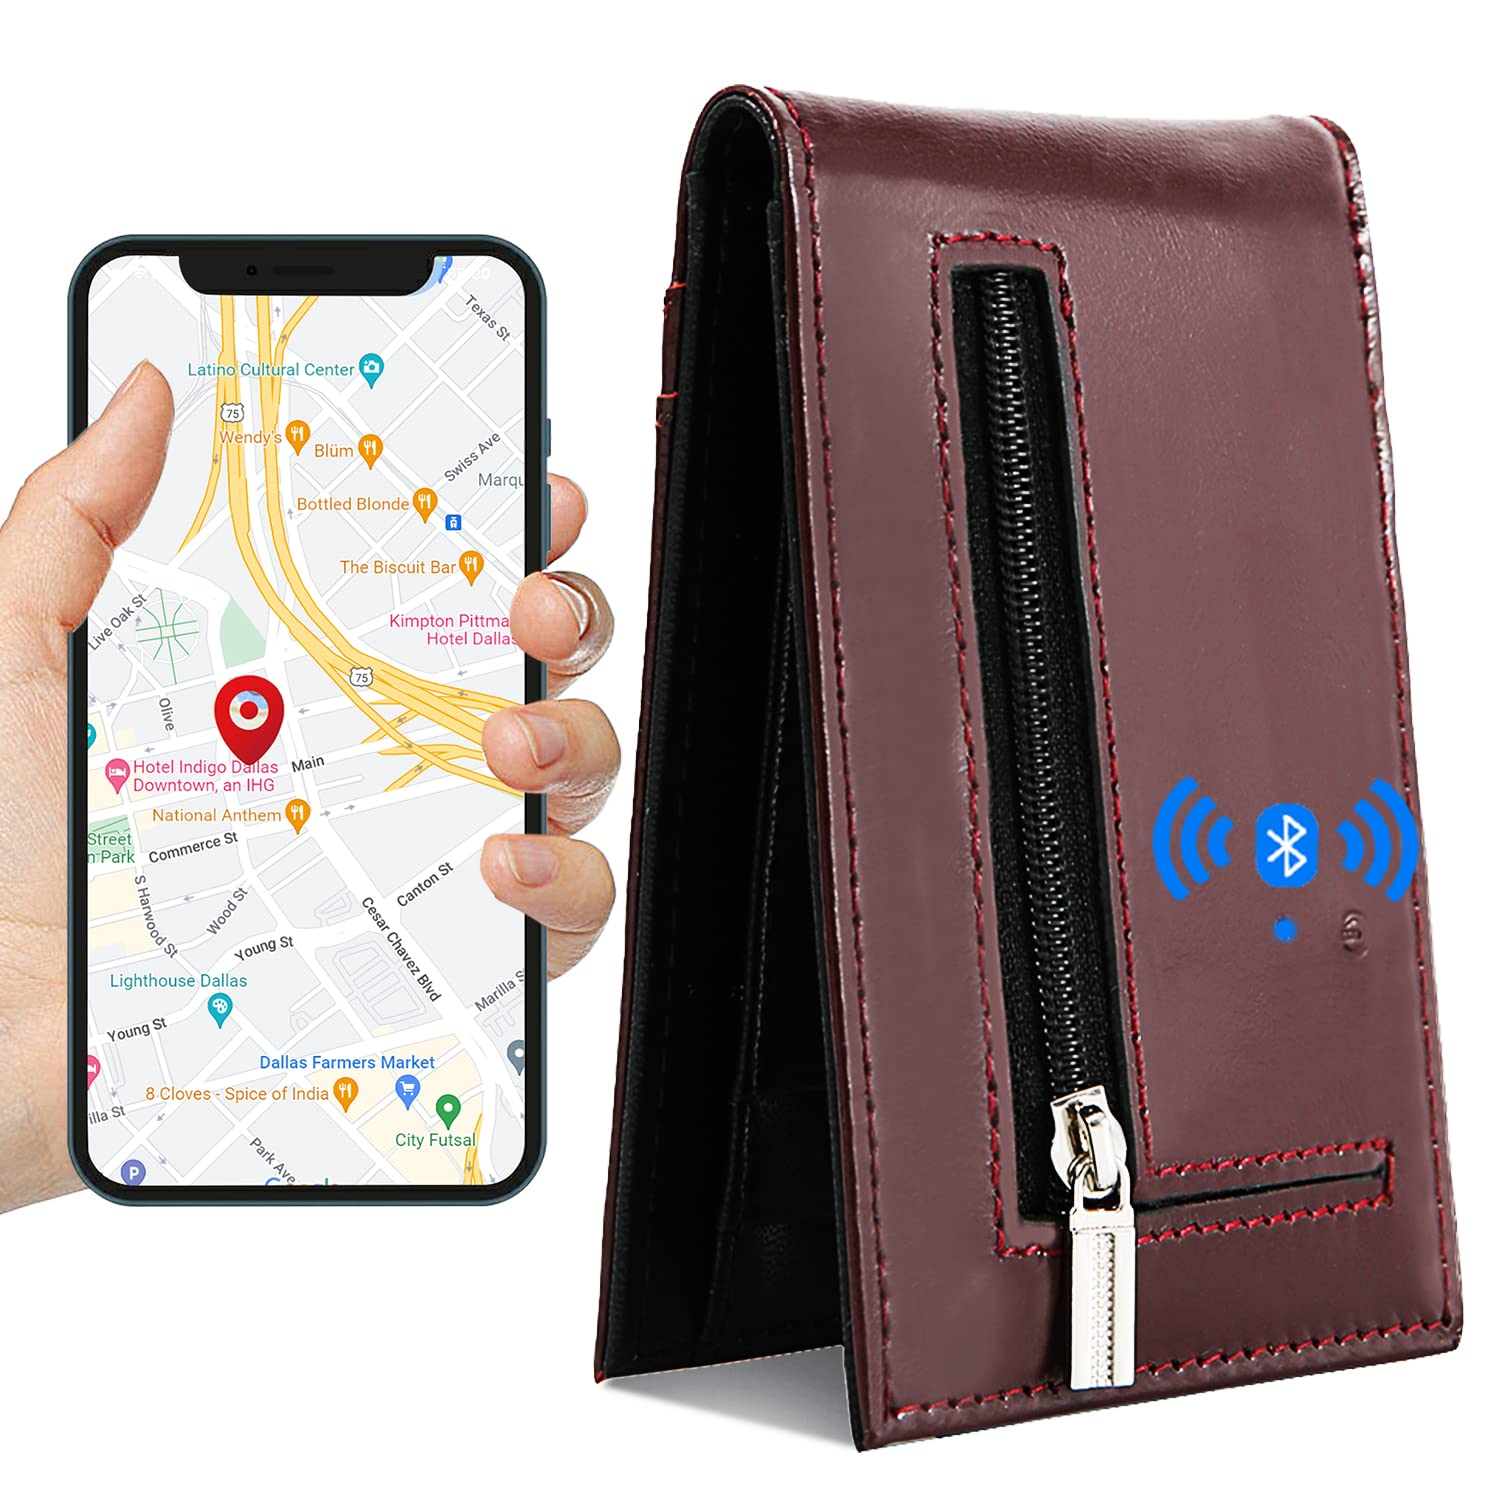 gps locator for wallet